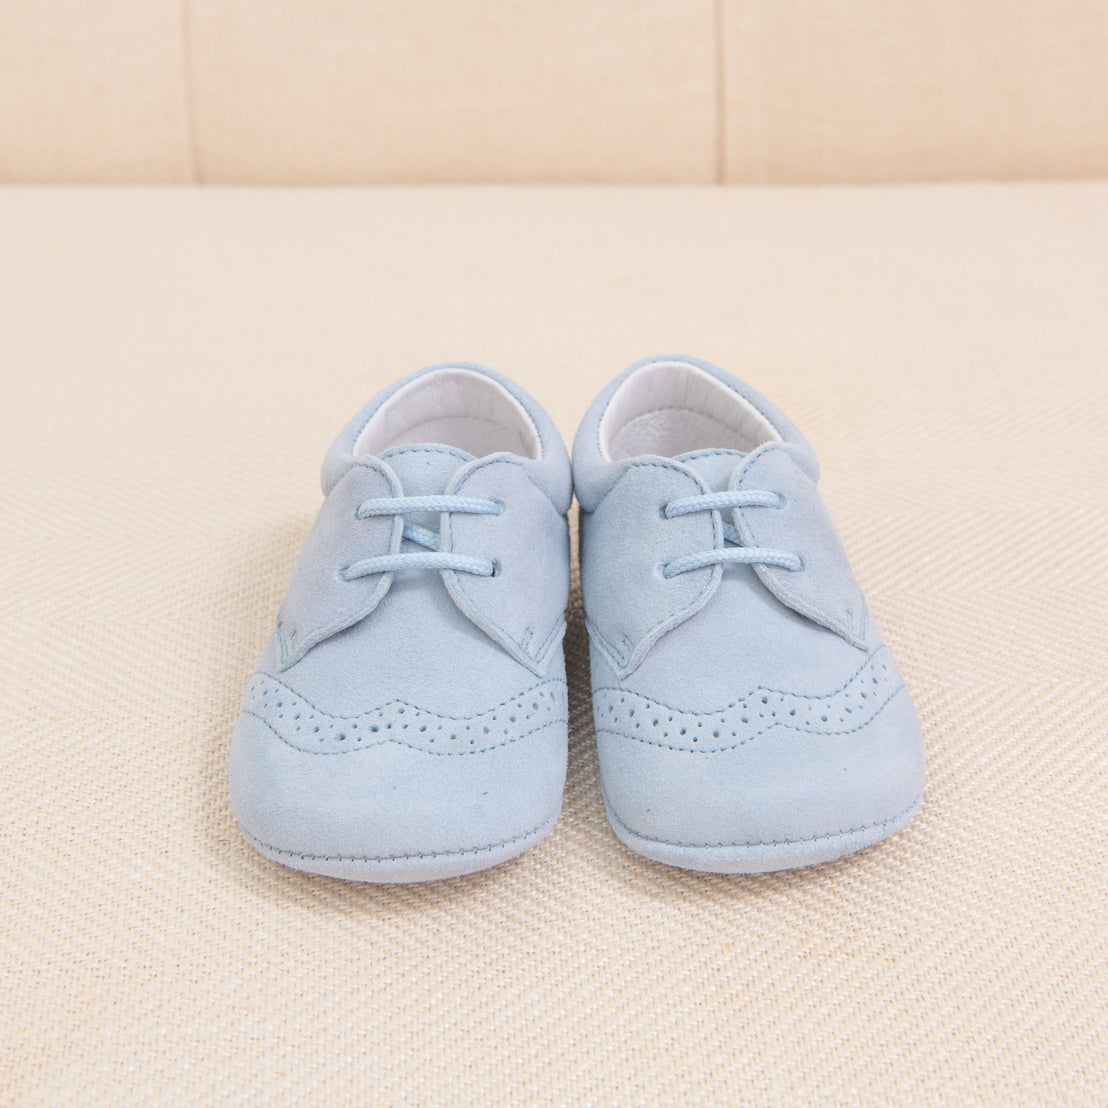 A pair of Baby Beau & Belle boys suede shoes in baby blue with laces, featuring classic brogue detailing, displayed on a soft beige fabric background.